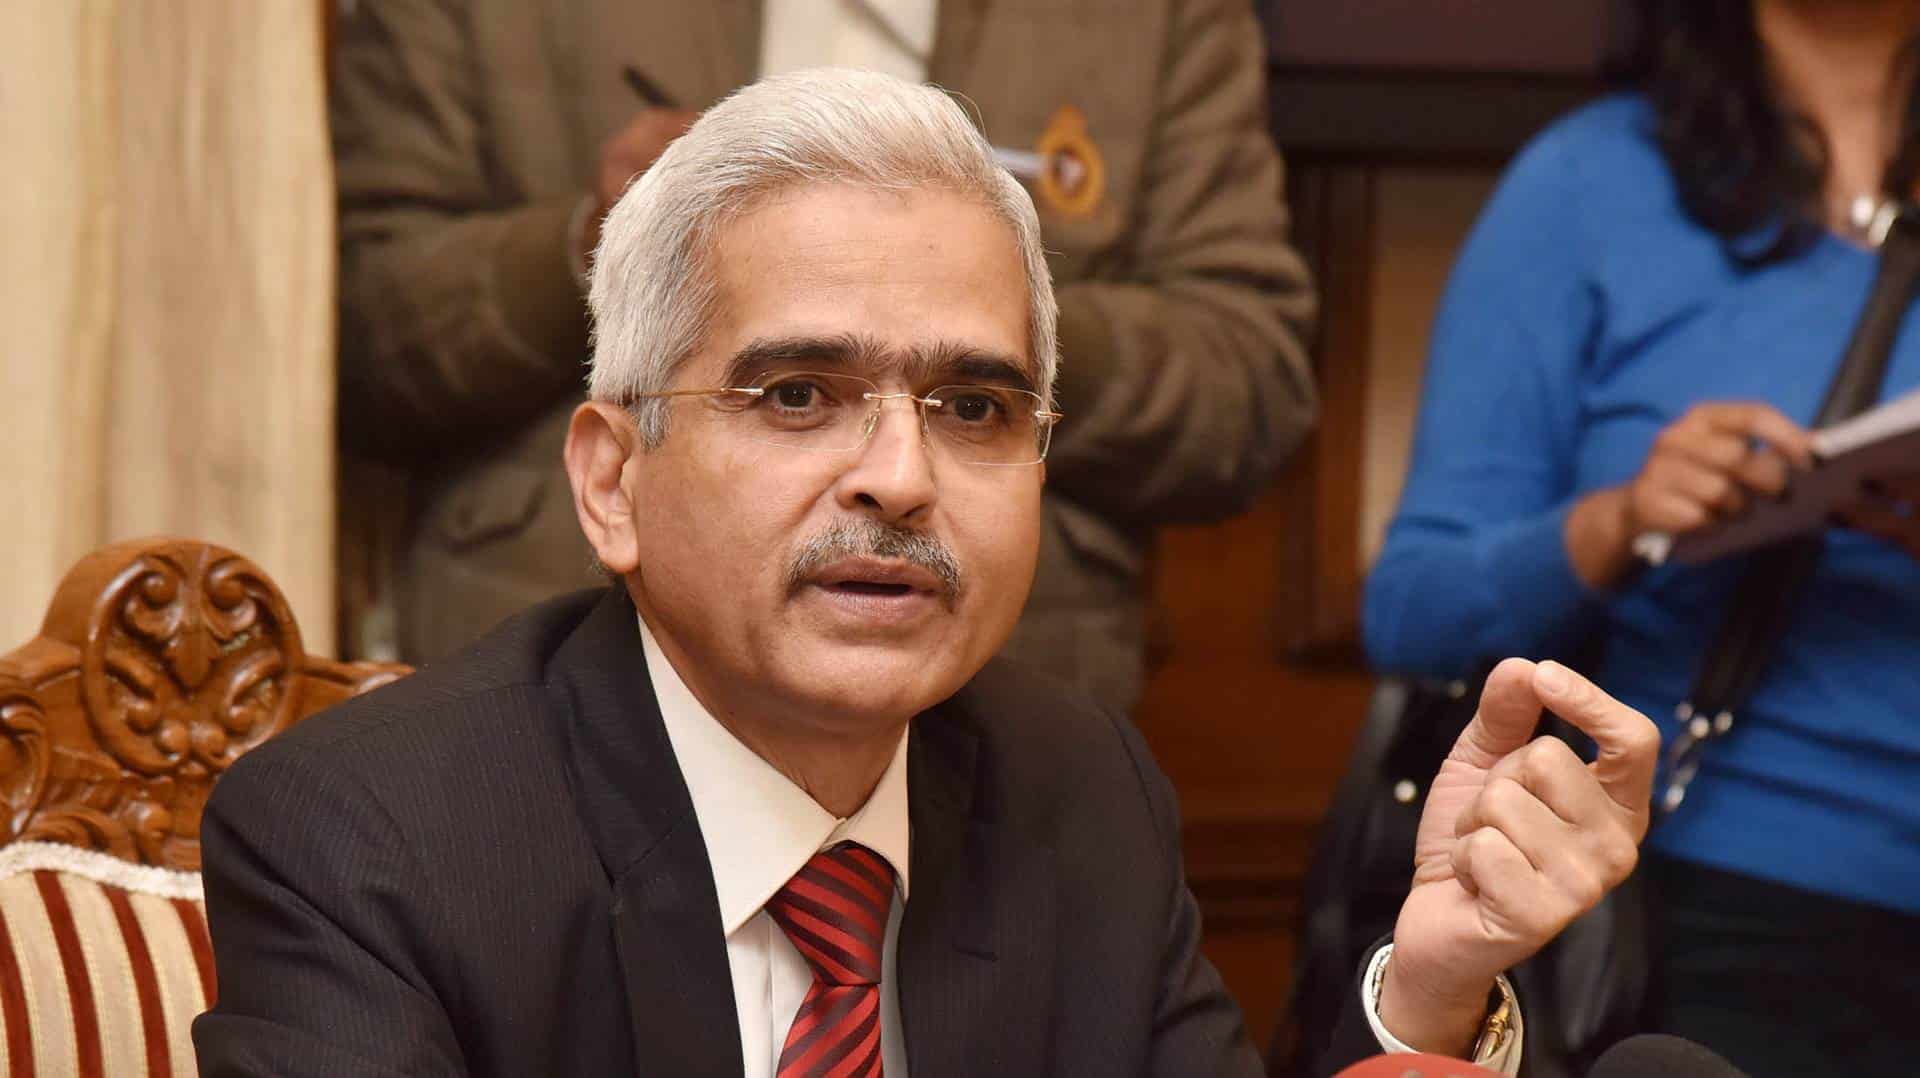 Support from all sides needed to nurture economic recovery: RBI Guv